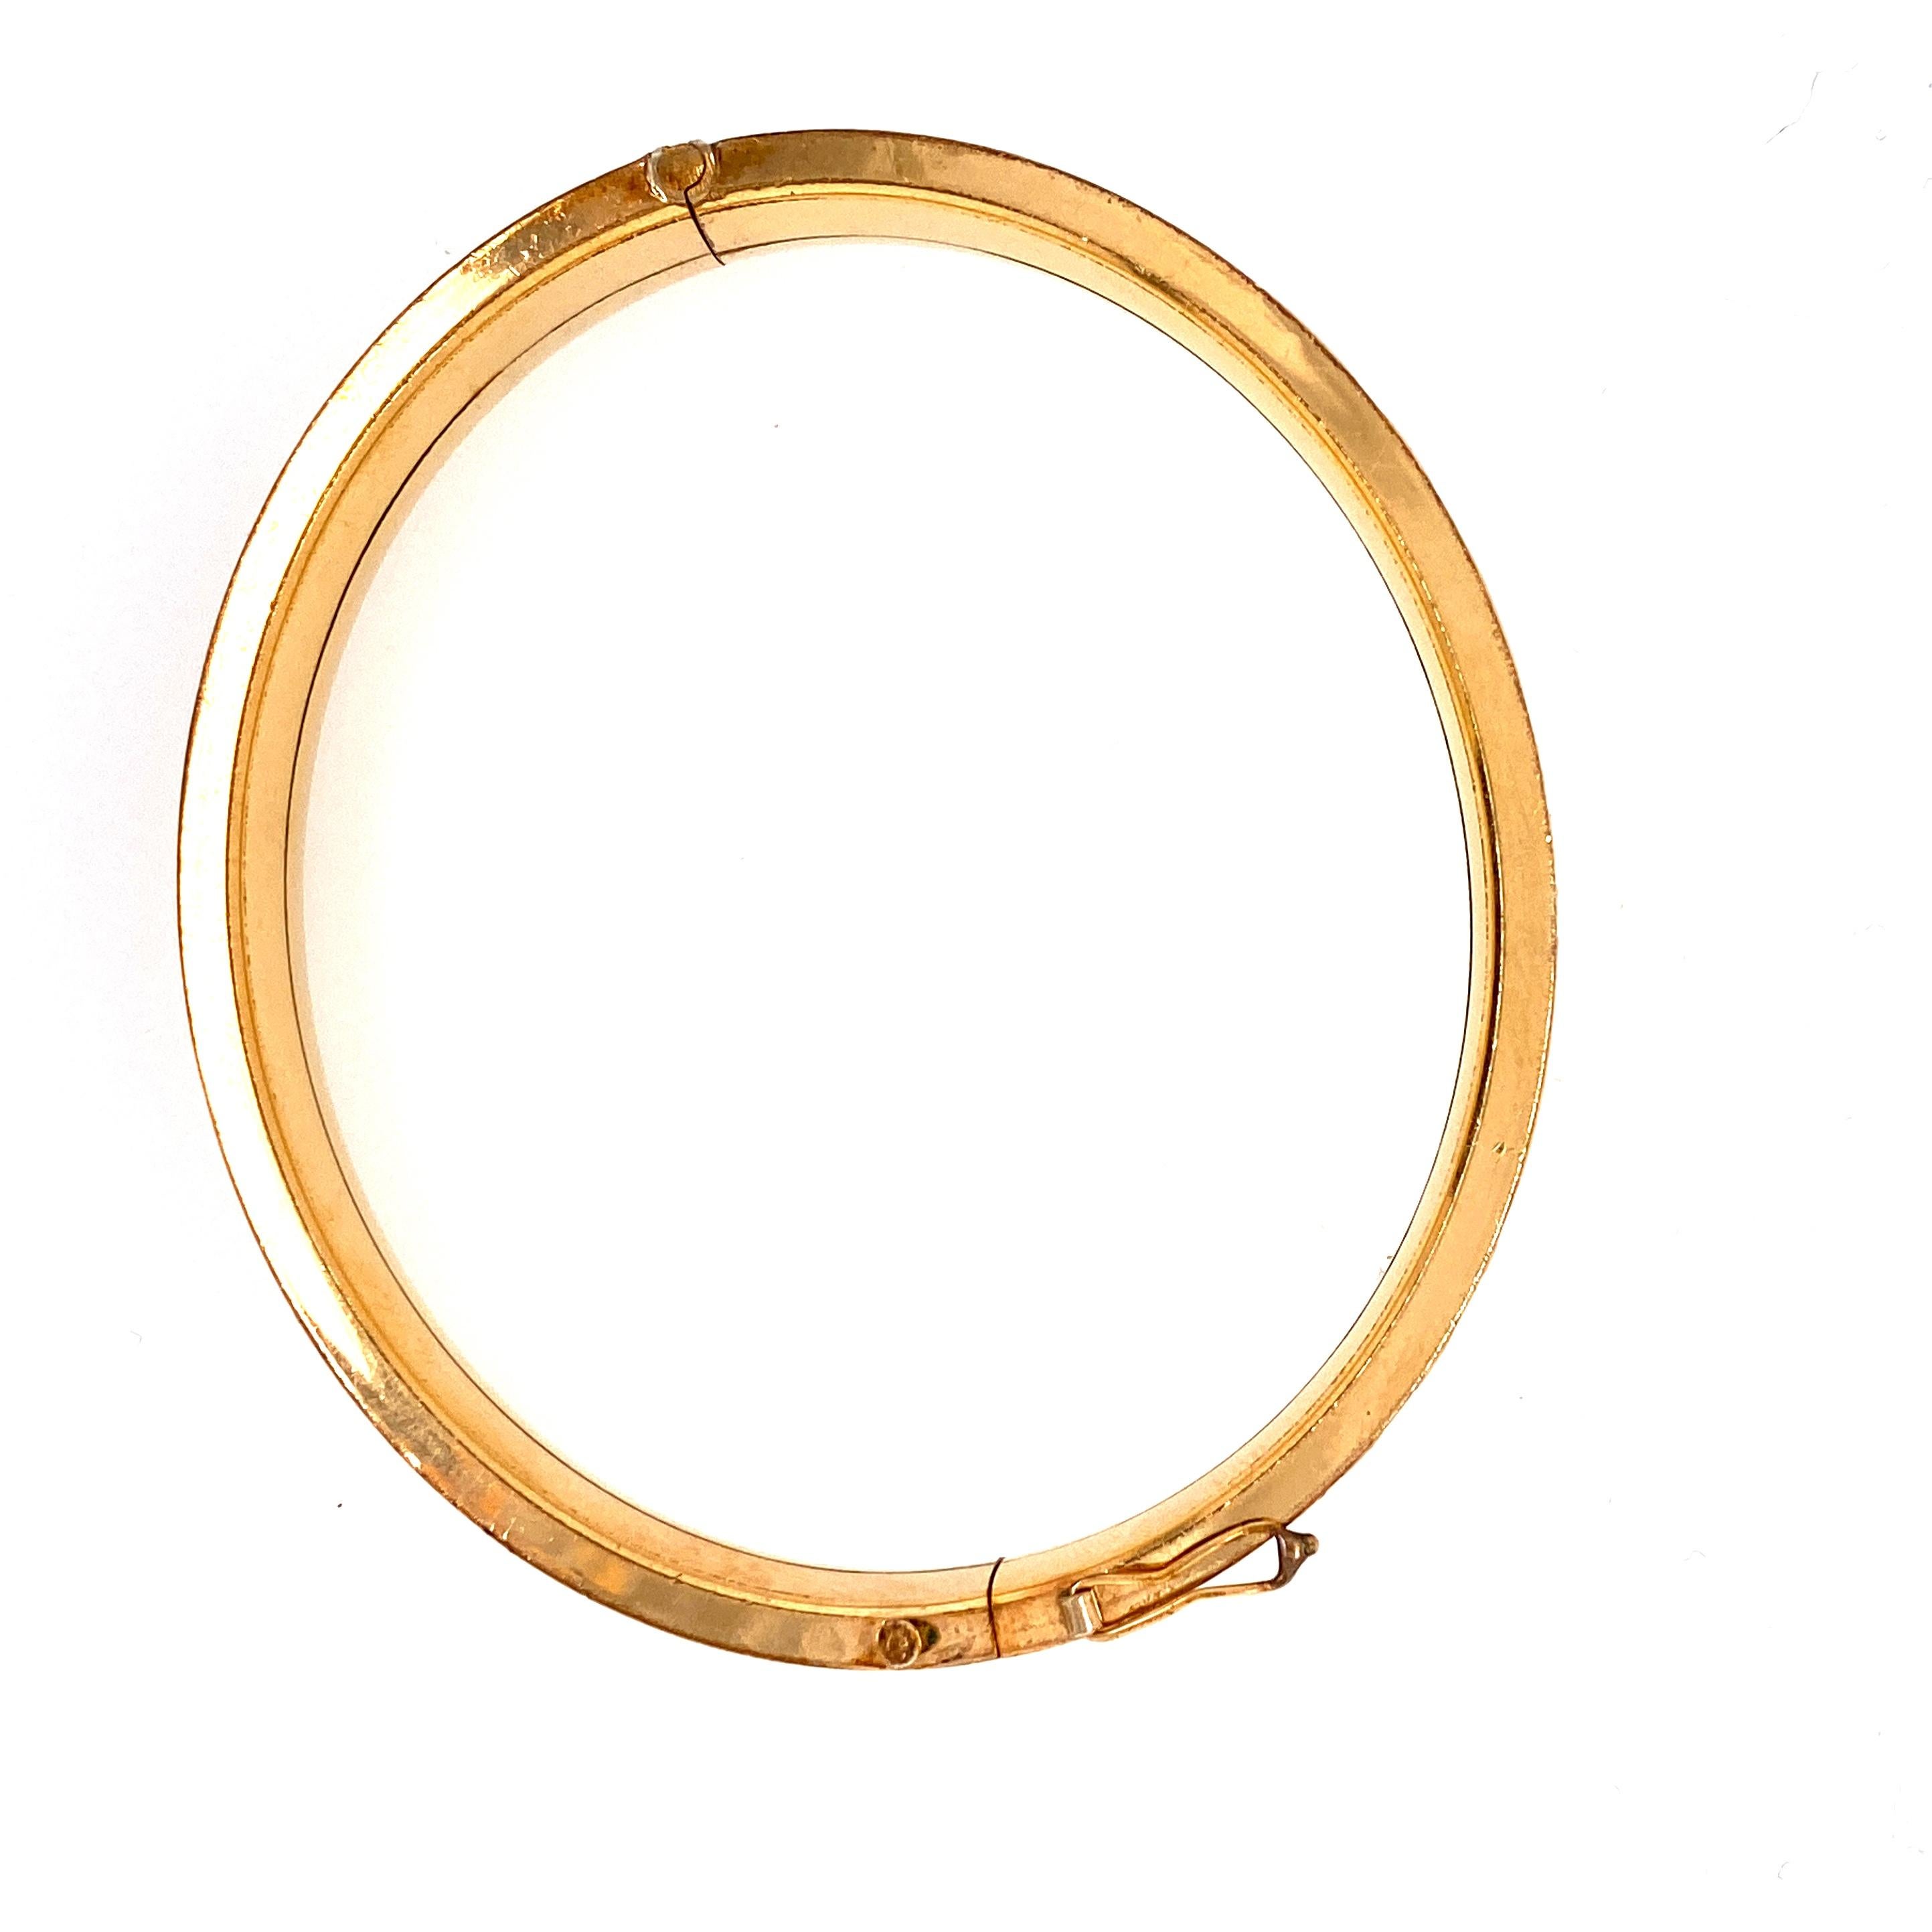 One 14 Karat rolled gold plated (stamped 14KRGP GERMANY) engraved hollow bangle bracelet measuring 10mm wide, with hinge hidden clasp with figure eight safety.  Circa 1950s.  